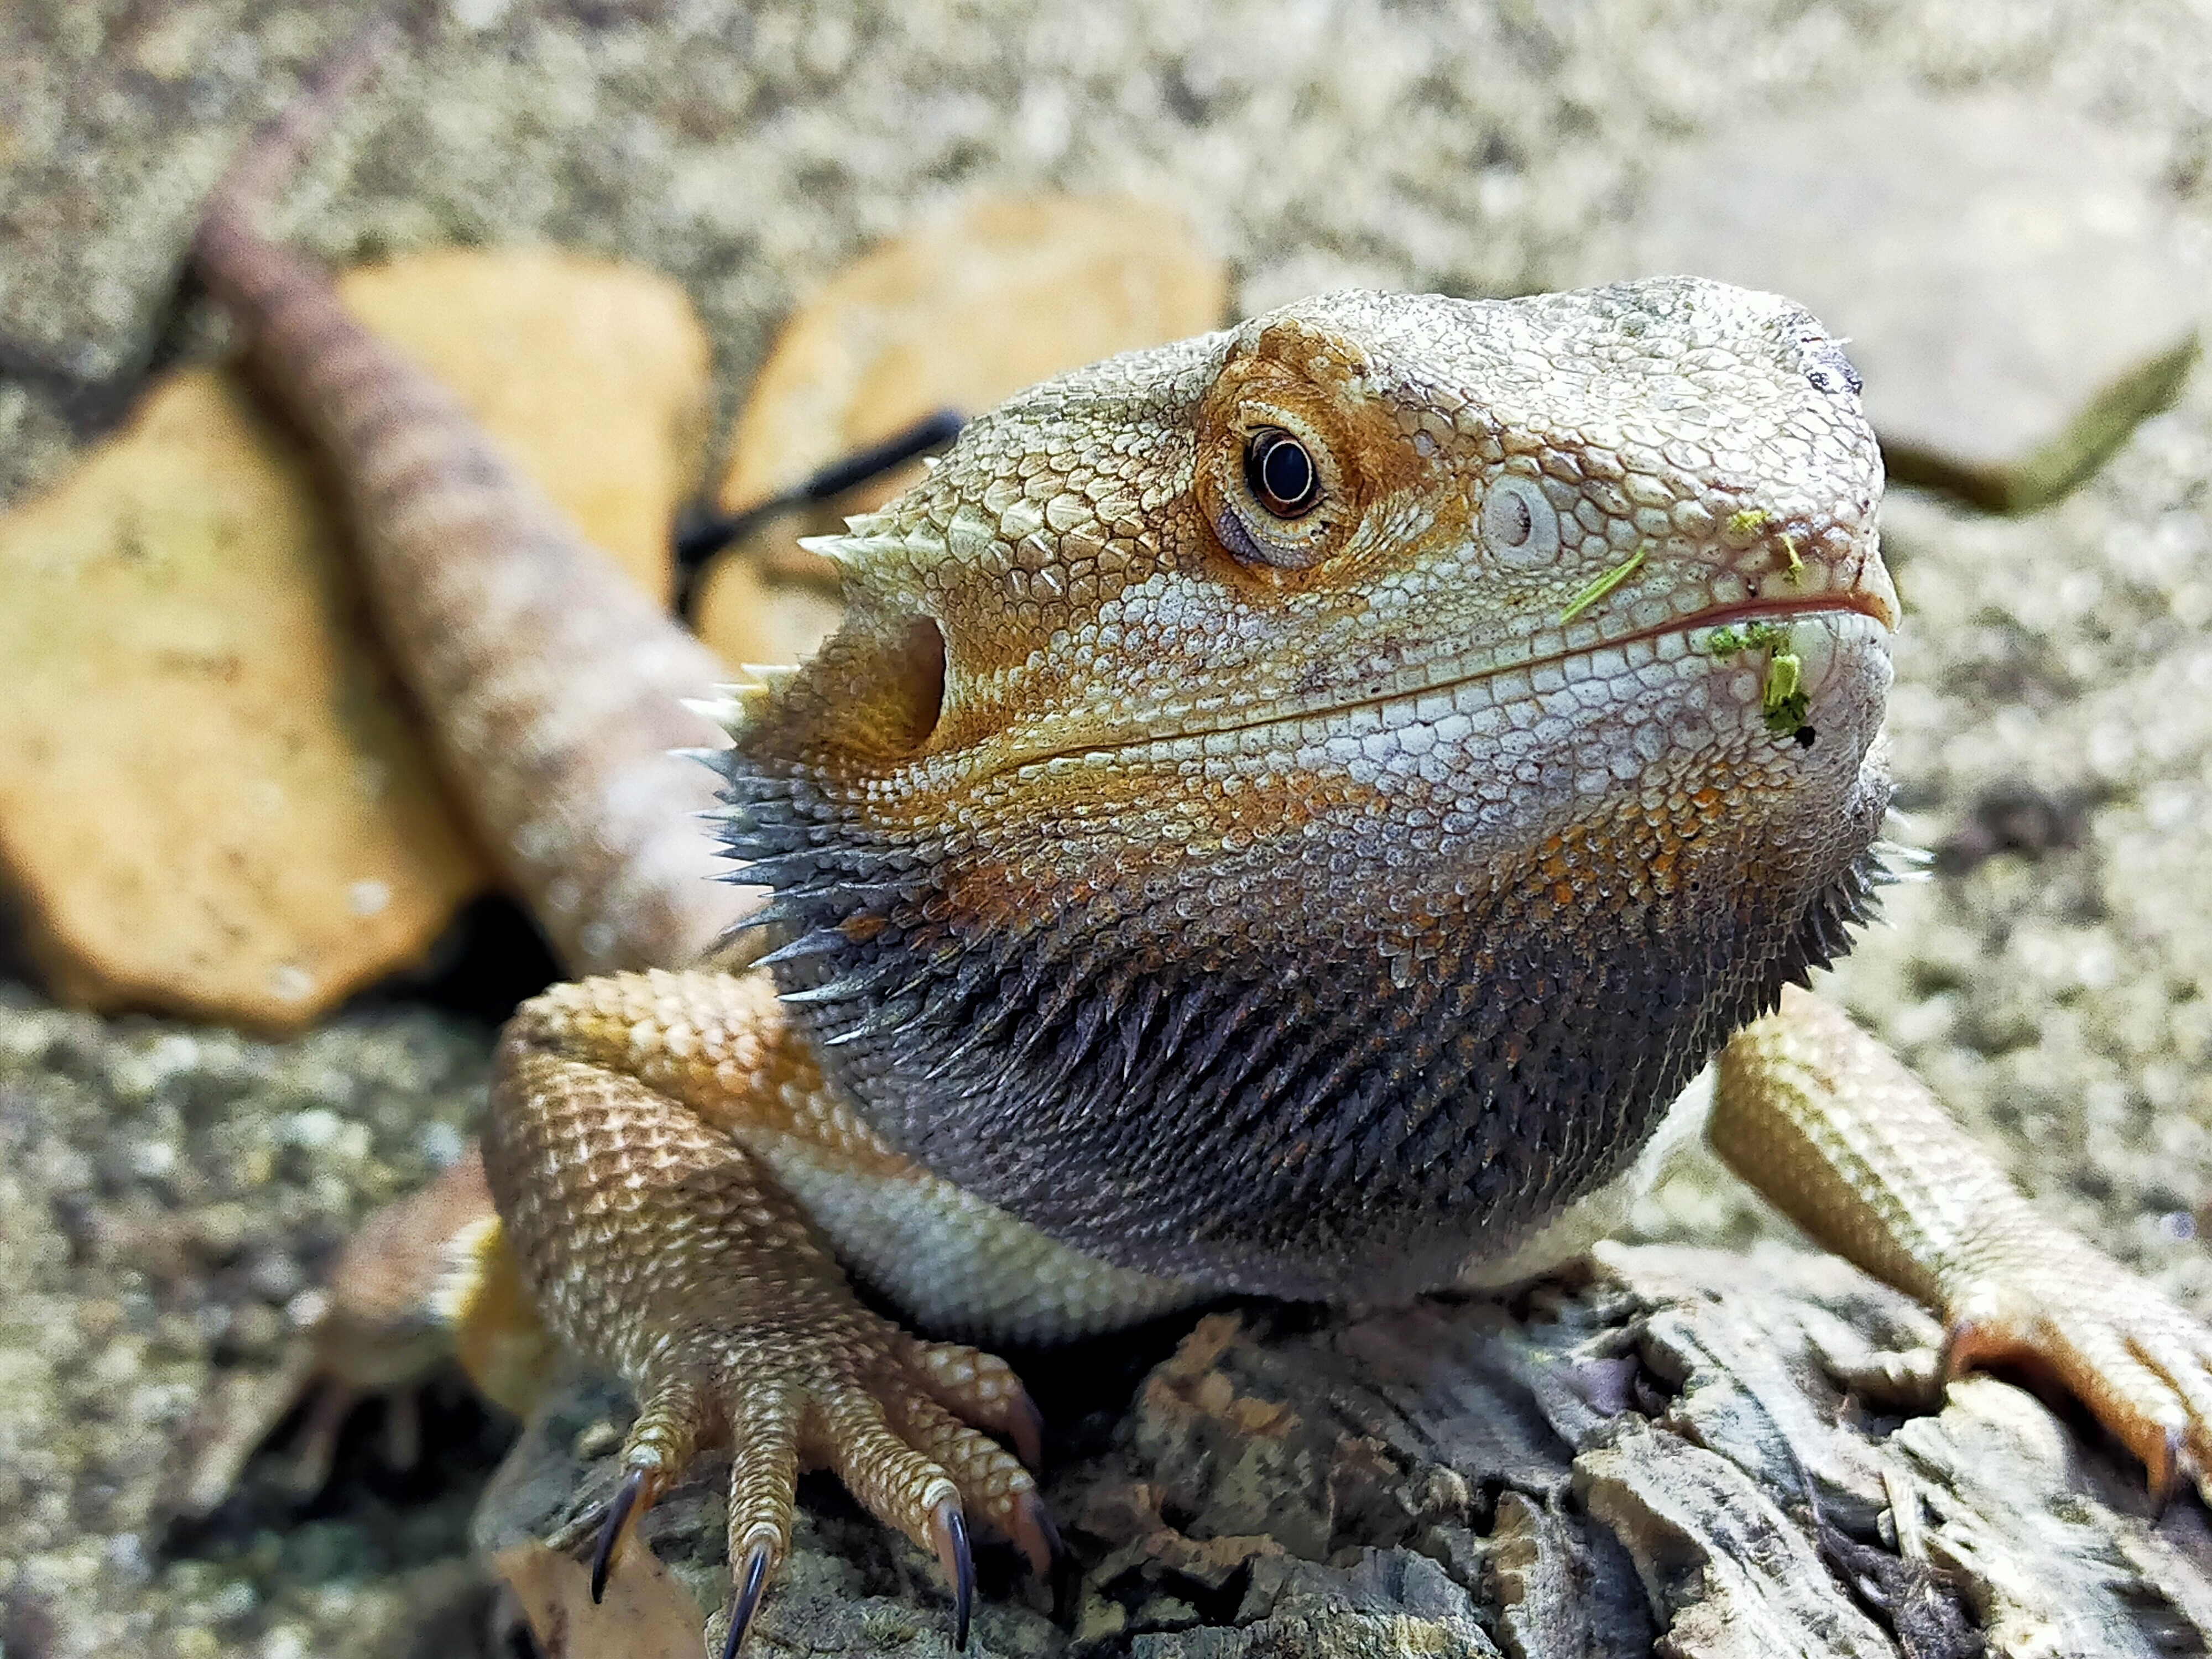 Leatherback Central Bearded Dragon by ARC Exotics